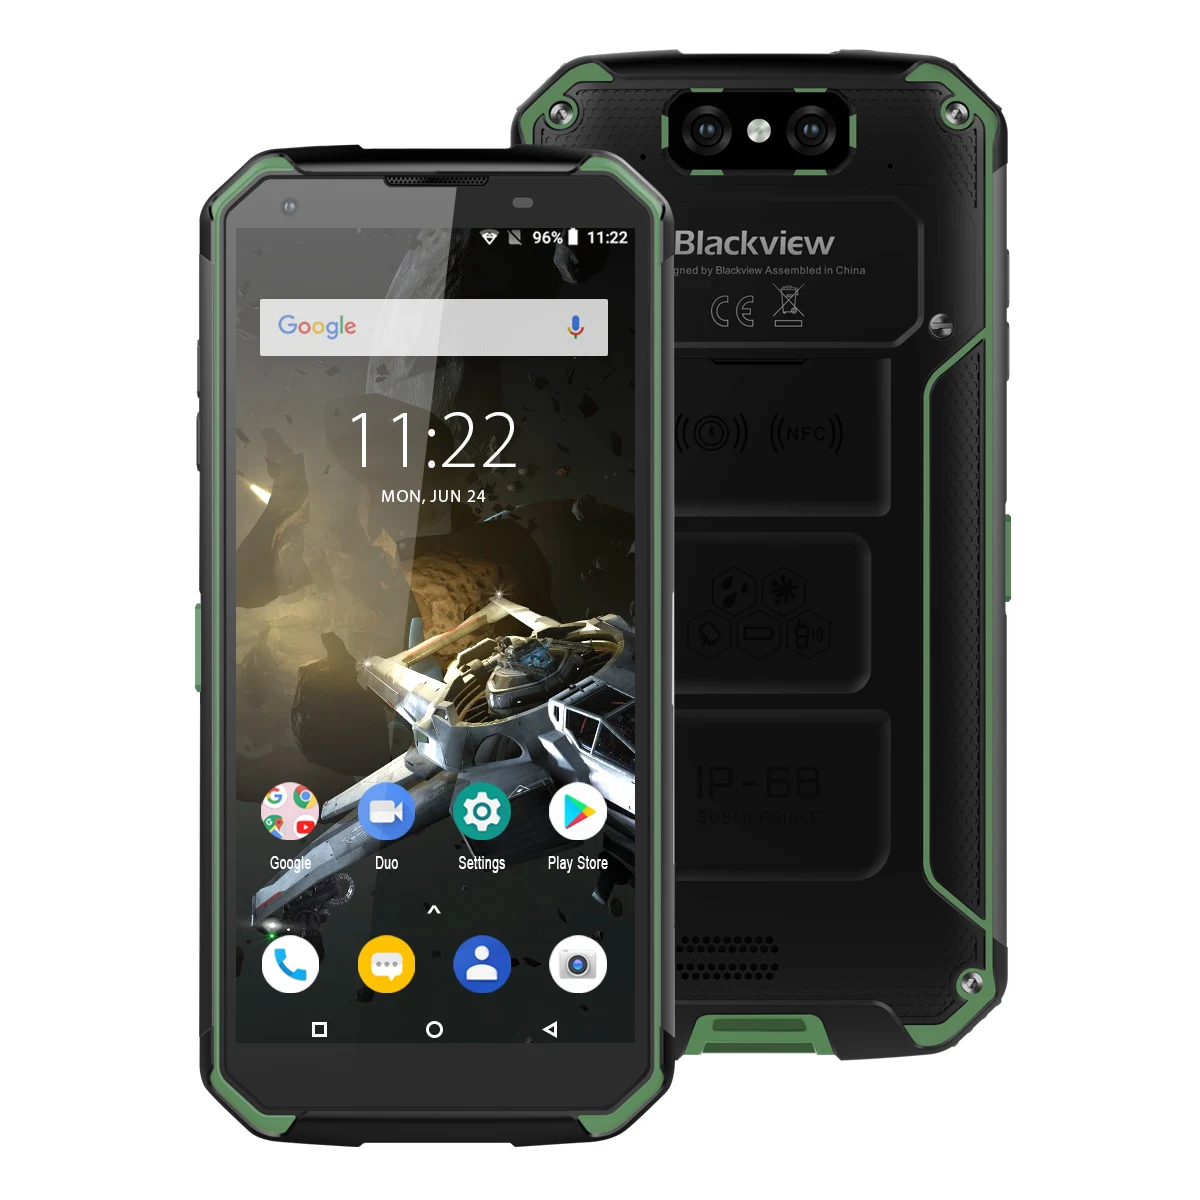 

Blackview BV9500 Plus Thermal Camera Mobile Phone Helio P70 5.7inch 4GB+64GB IP68 Rugged Smartphone 16MP Quad Rear Camera, Black,yellow,green